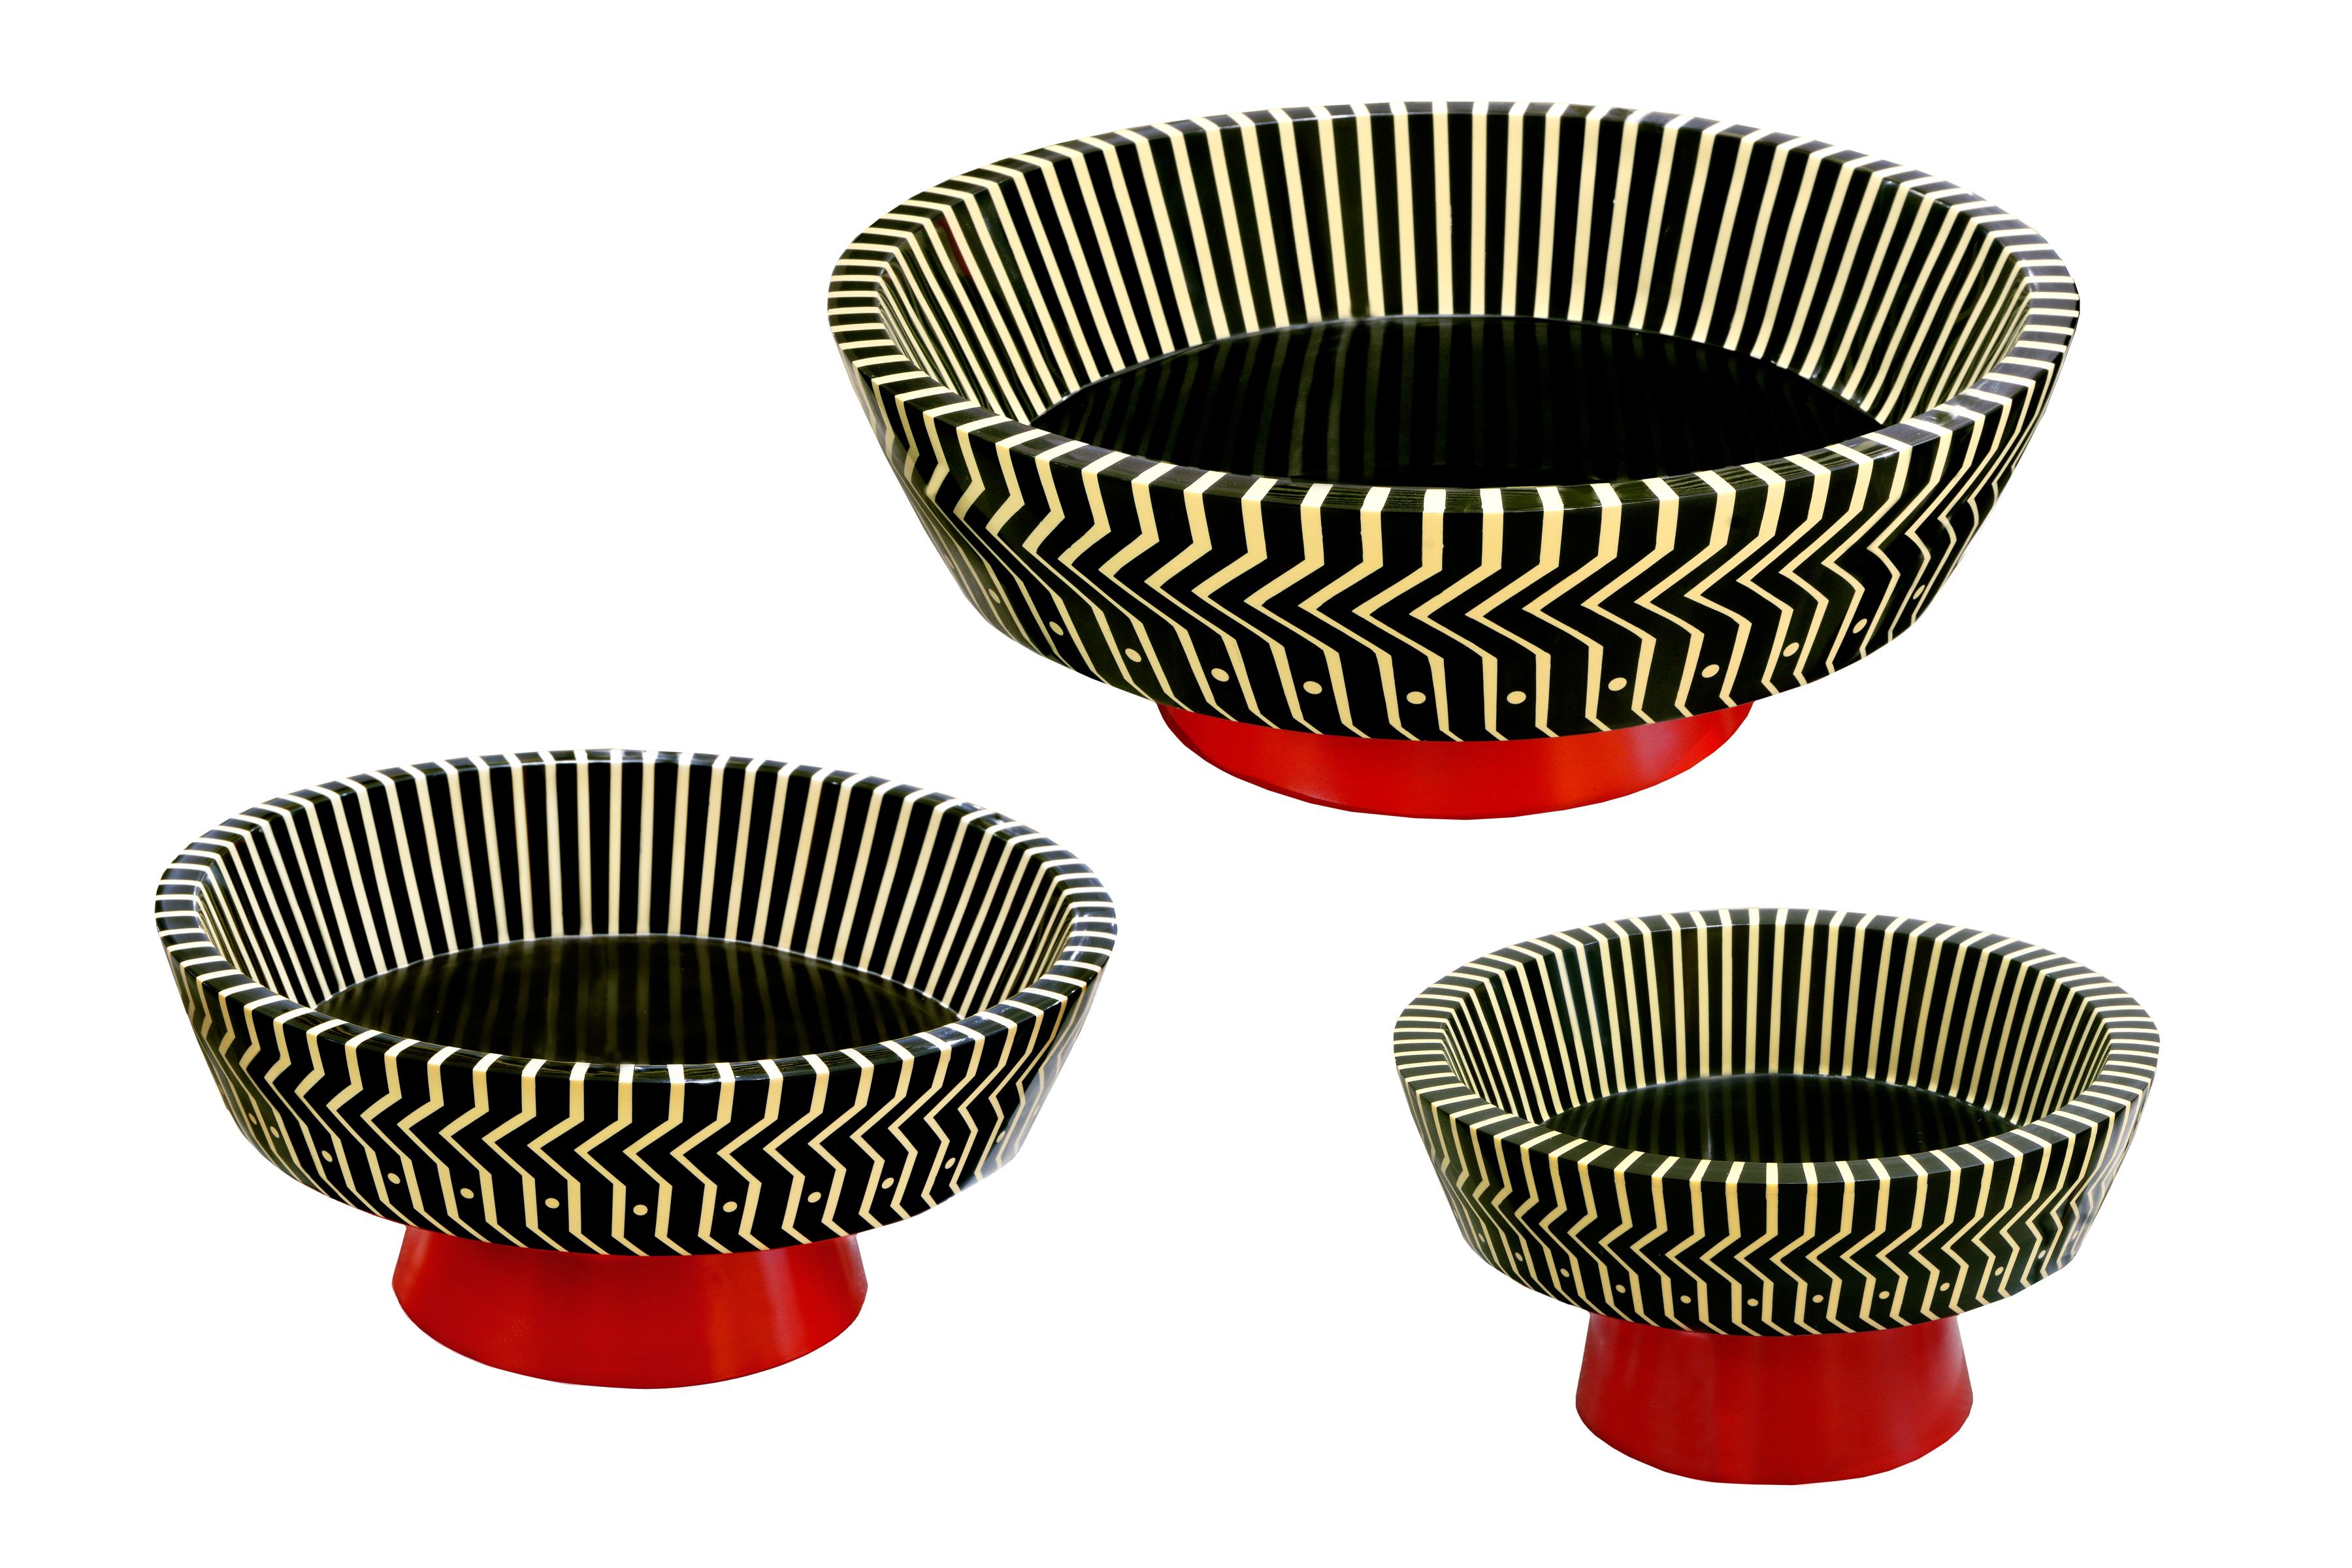 Fruit bowl is a gorgeous accessory that immediately demands visual attention. It has a striking vanilla and black pattern offset by a scarlet base. Available in three sizes.

India's handicrafts are as multifarious as its cultures, and as rich as